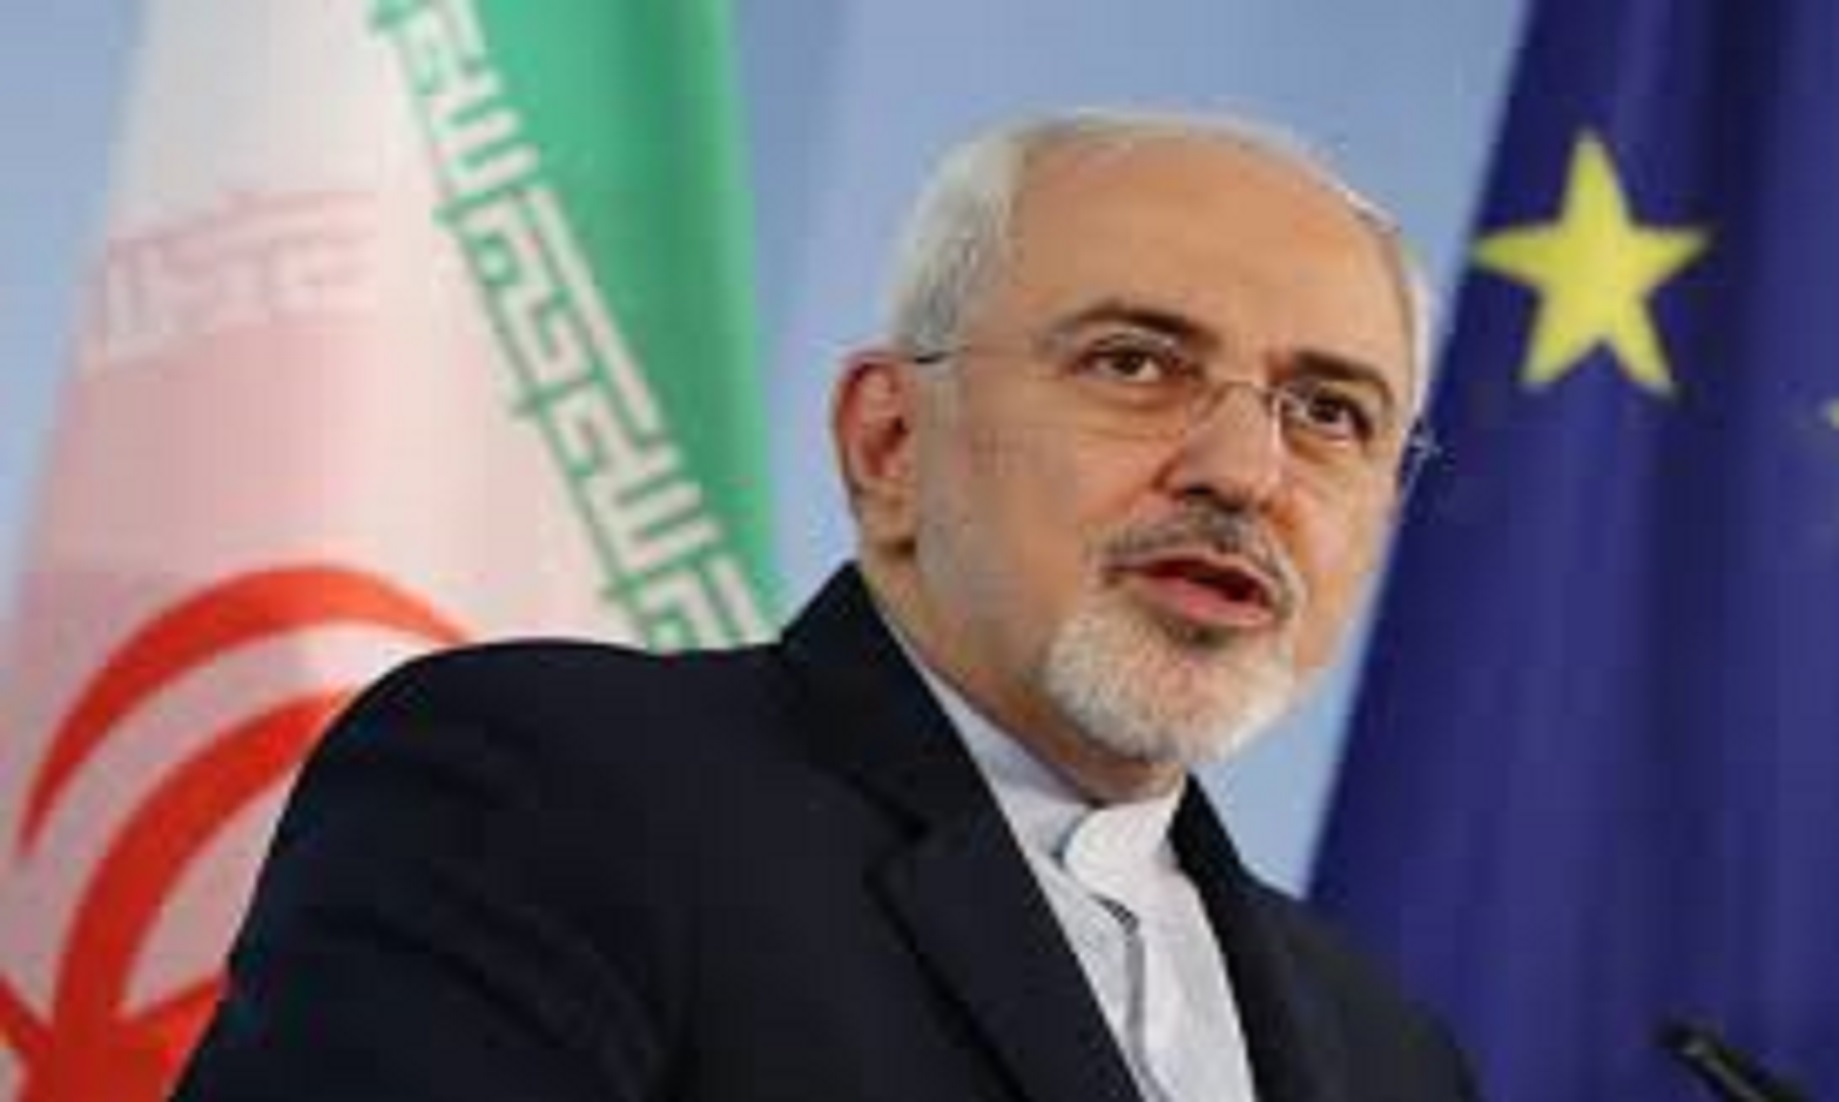 Iran’s FM To Visit Europe Amid Mounting U.S. Pressures